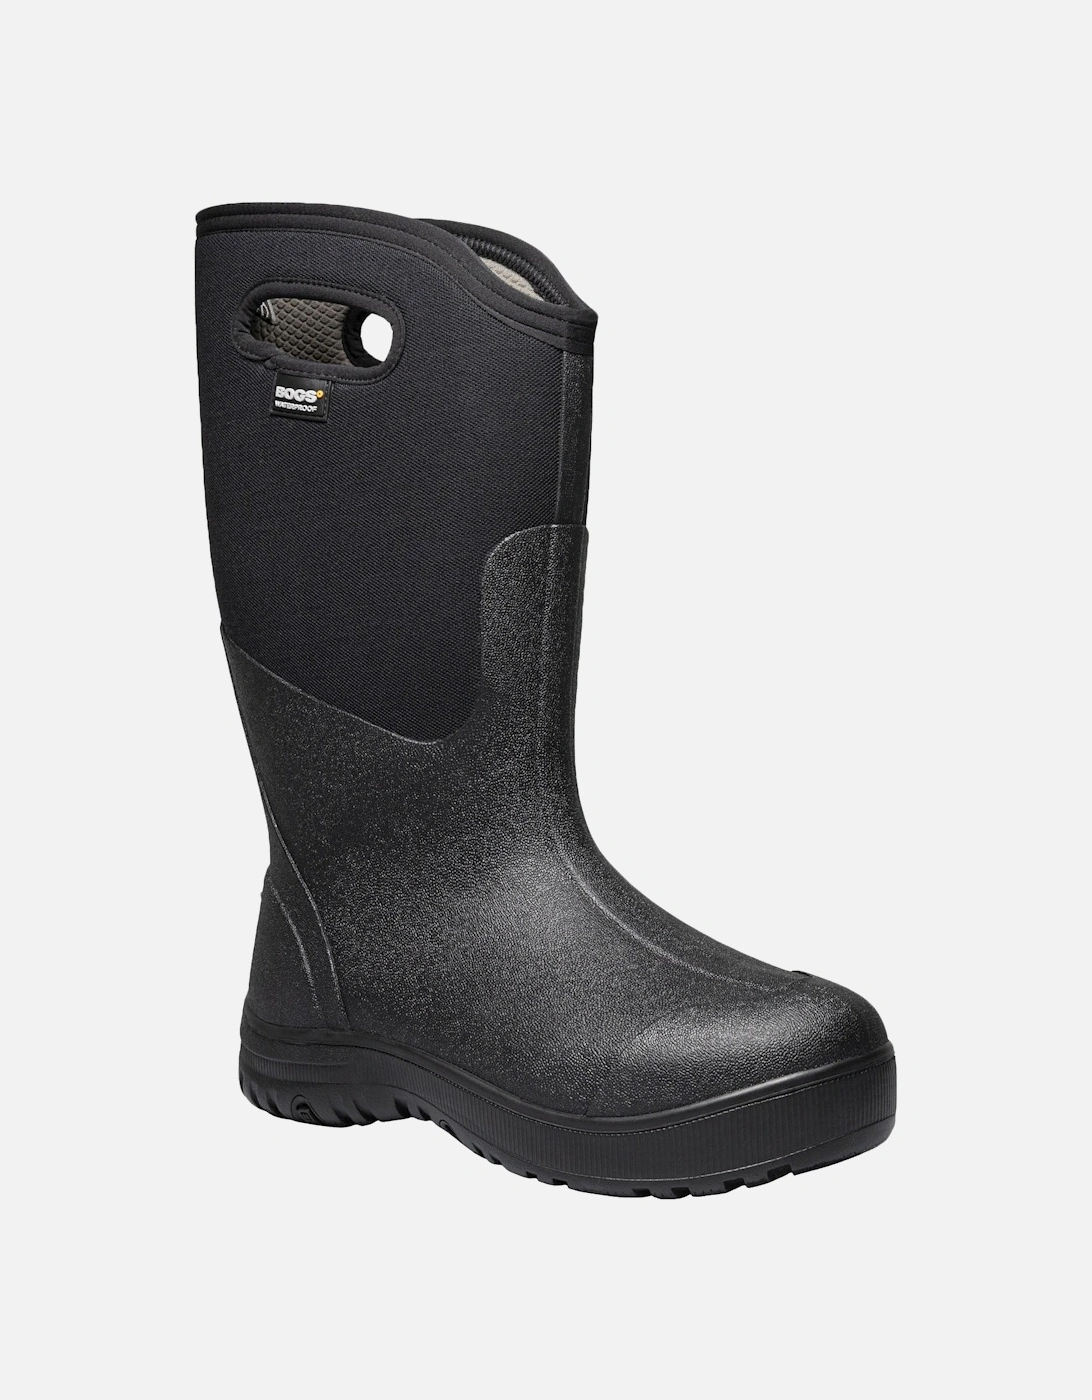 Mens Ultra High Insulated Waterproof Wellington Boots - Black, 9 of 8